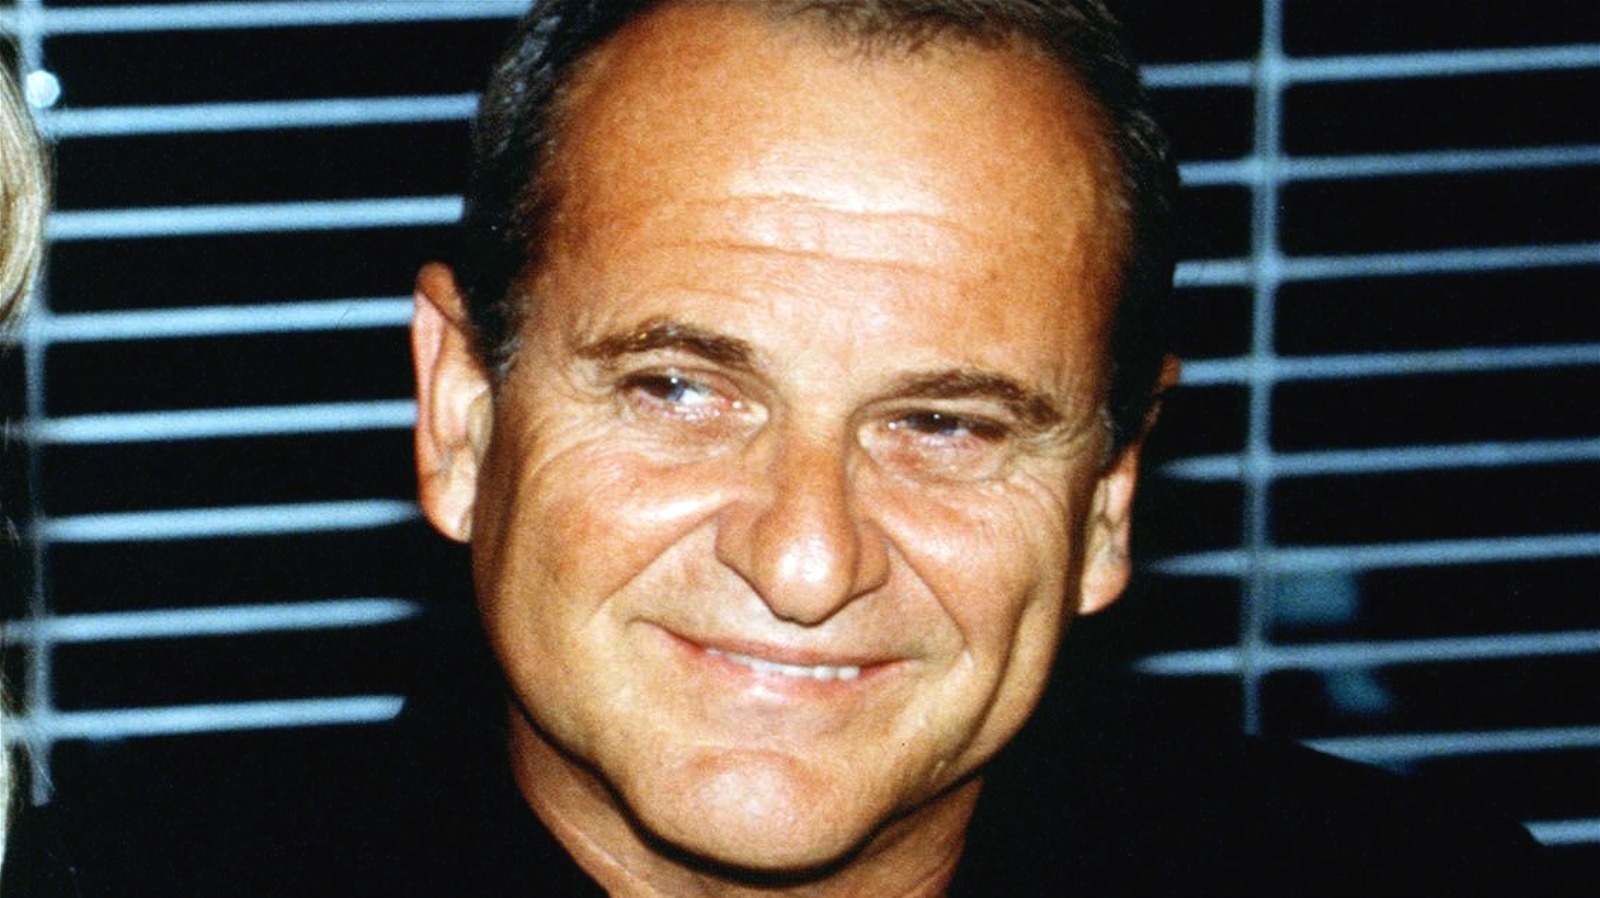 The Improvised Joe Pesci Line That Changed Goodfellas Forever